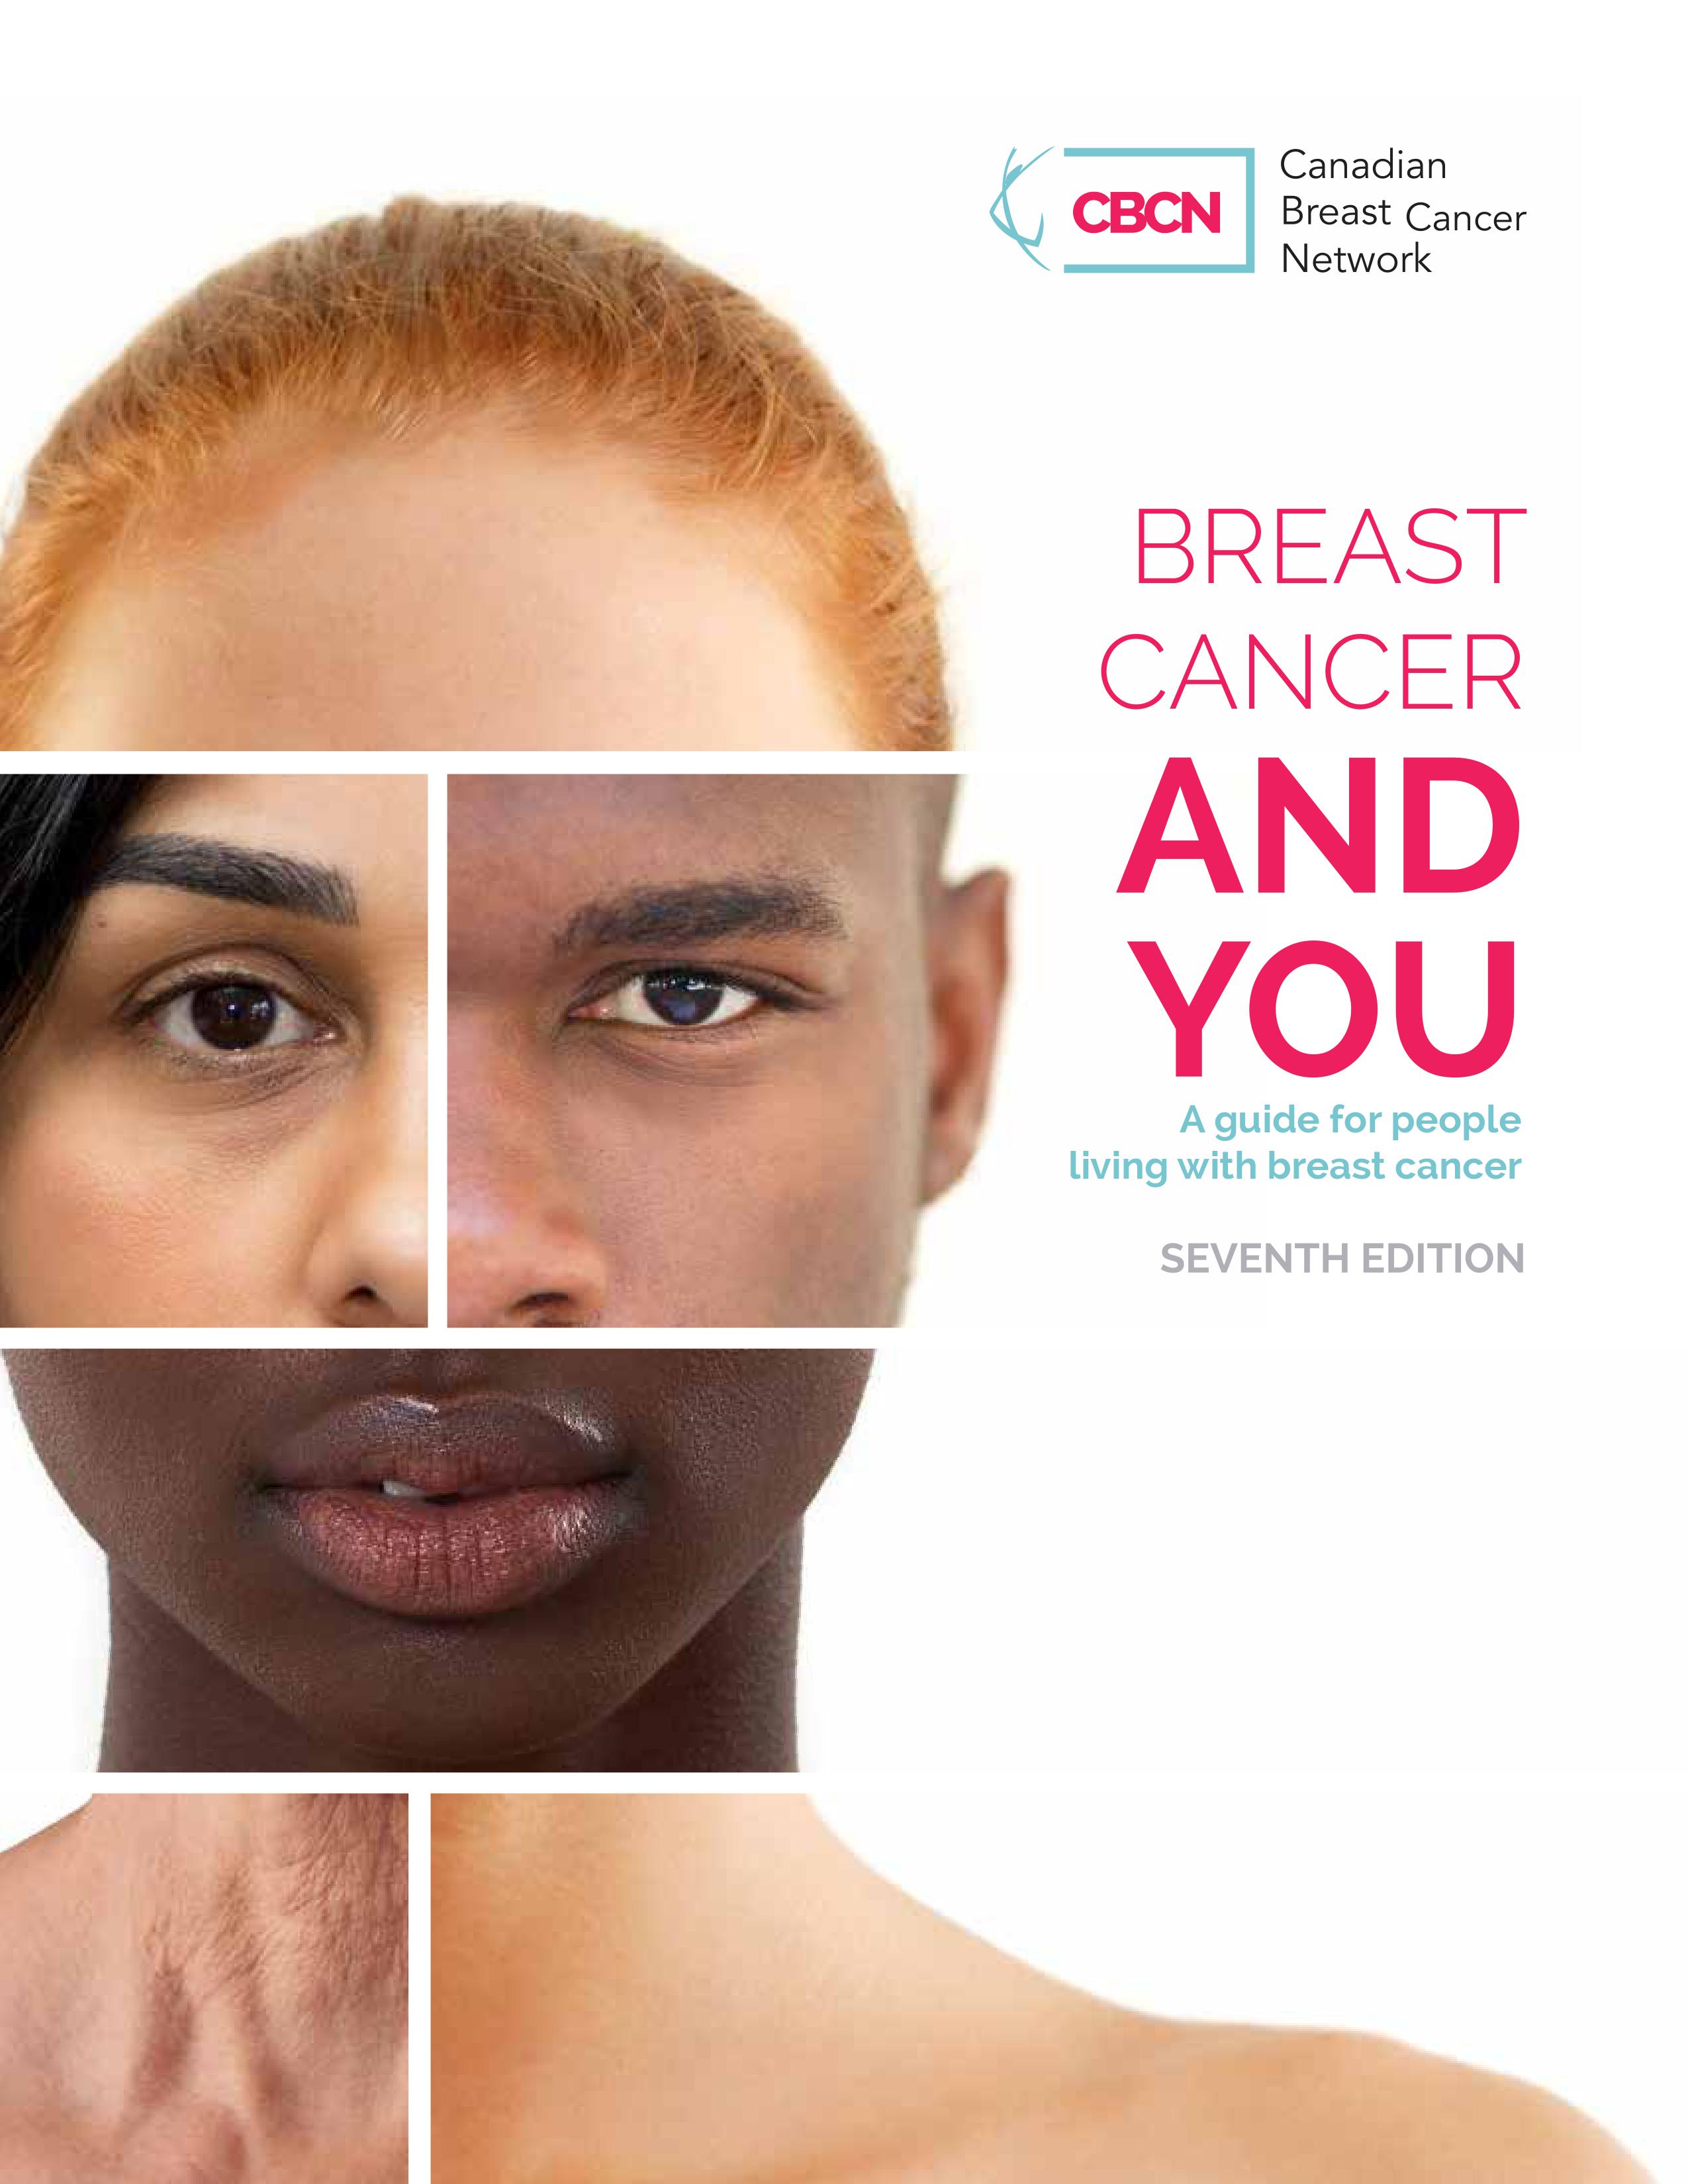 What Every Woman Needs to Know about Breast Care [eBook]